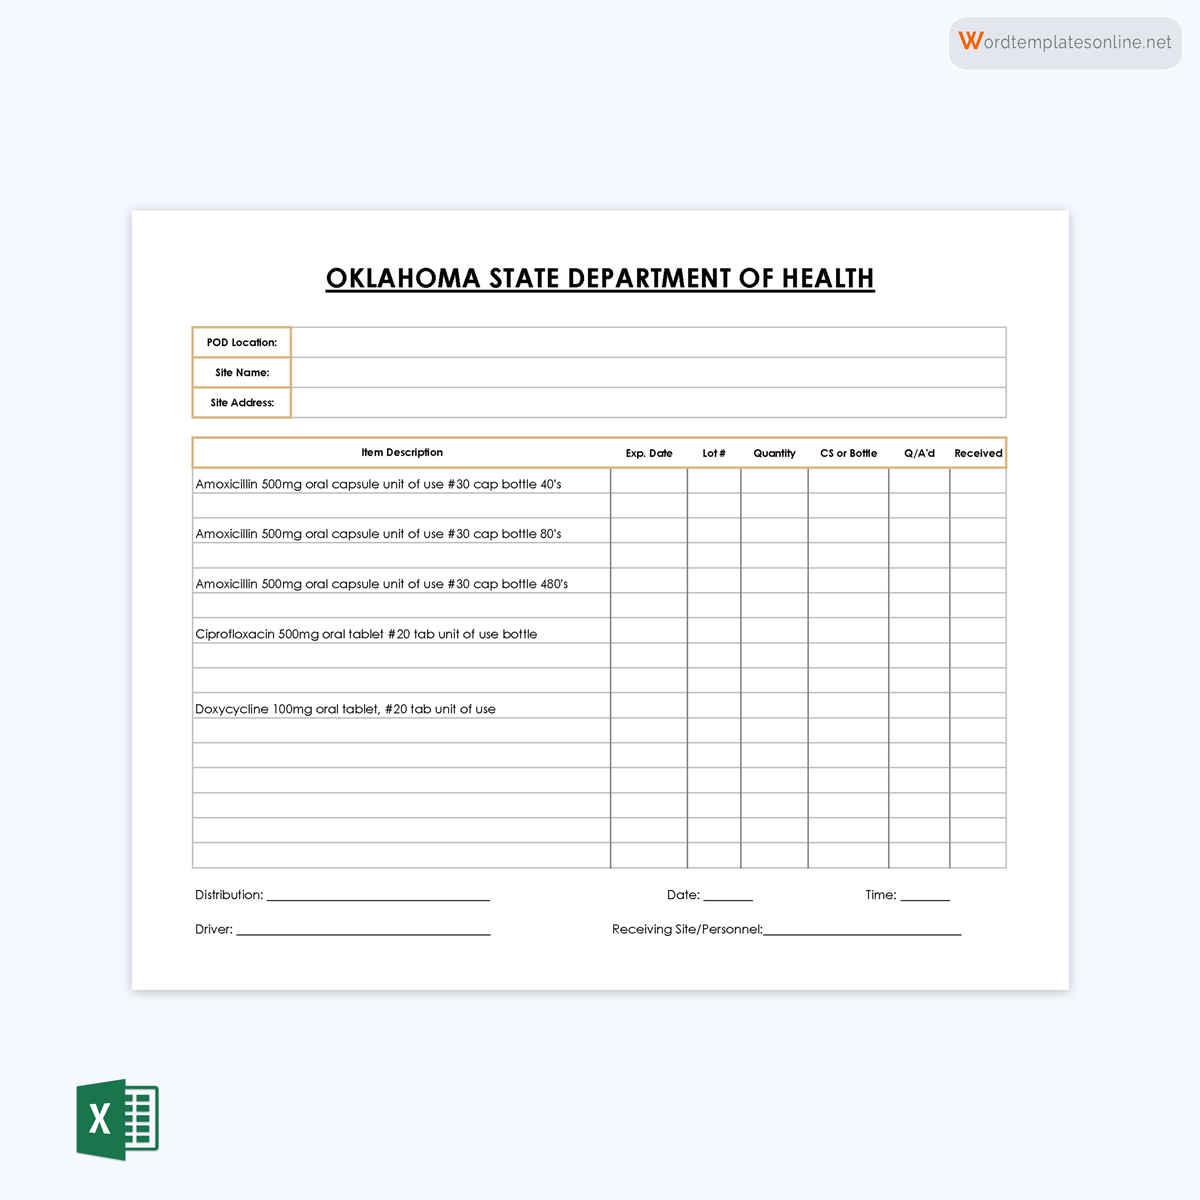 Oklahoma inventory spreadsheet template for health department